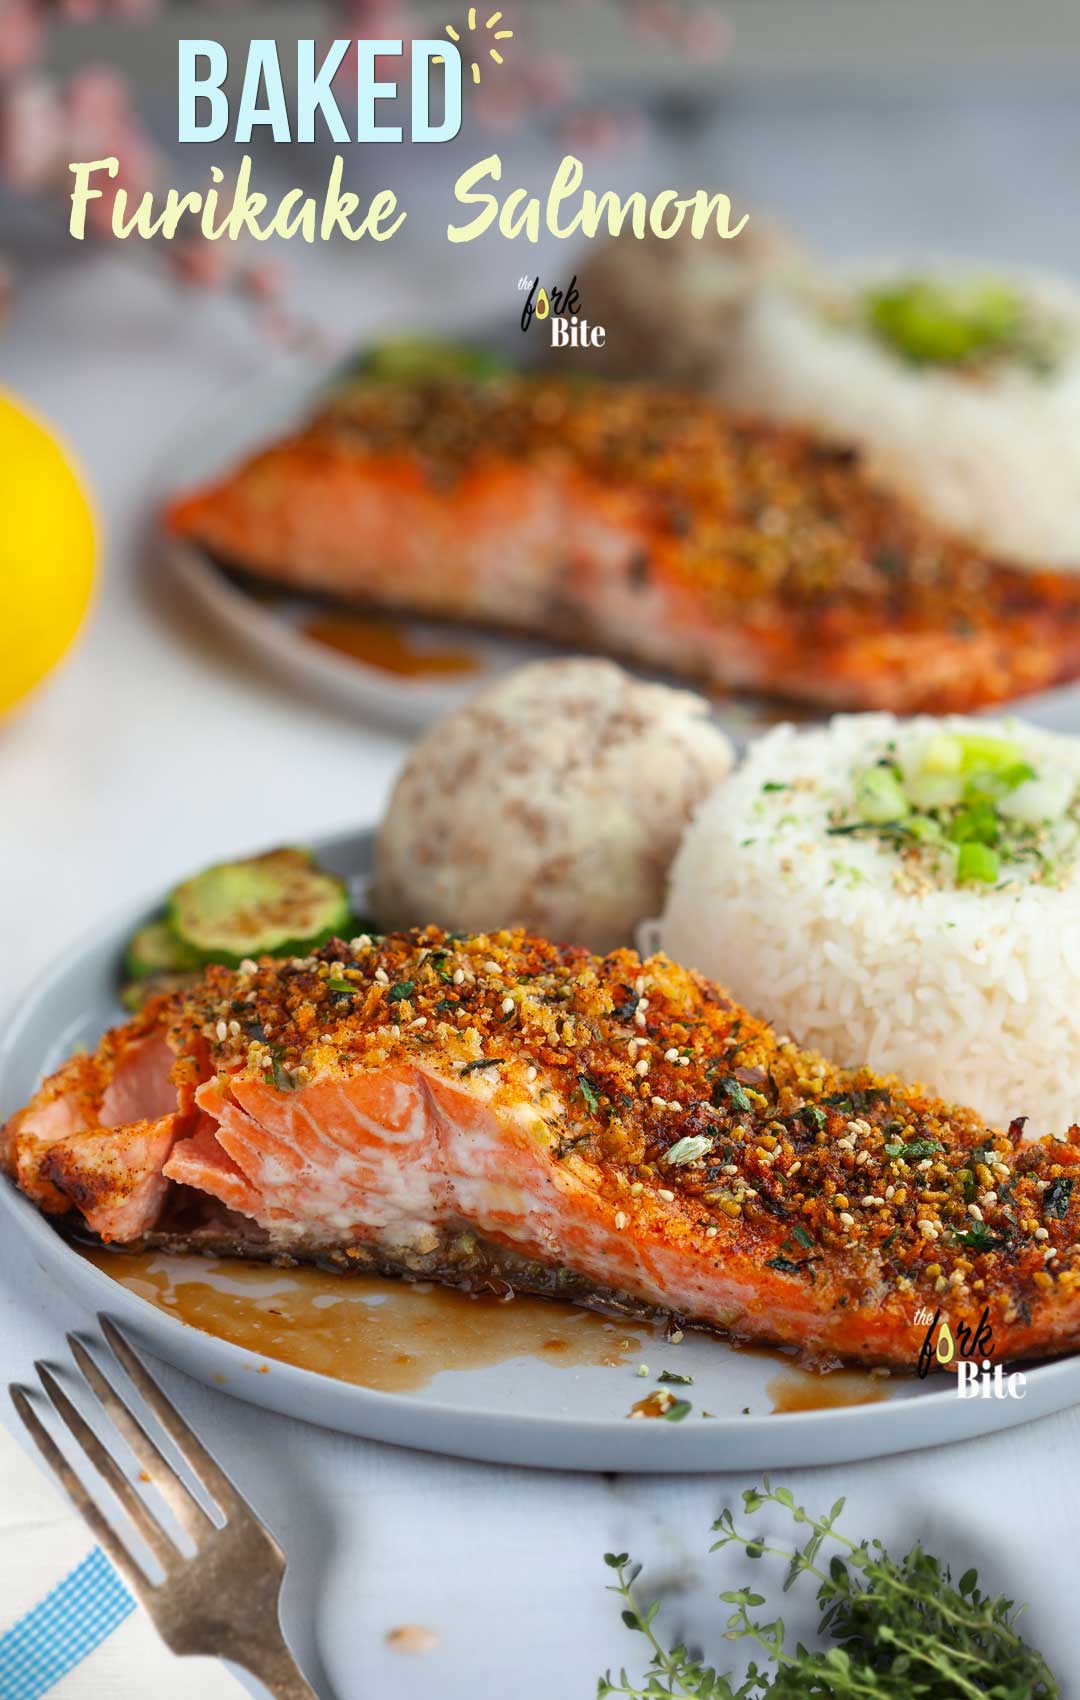 Salmon never gets old to me. It's one of my favorite proteins. I love finding different ways to cook it, and this furikake salmon recipe is a new favorite.